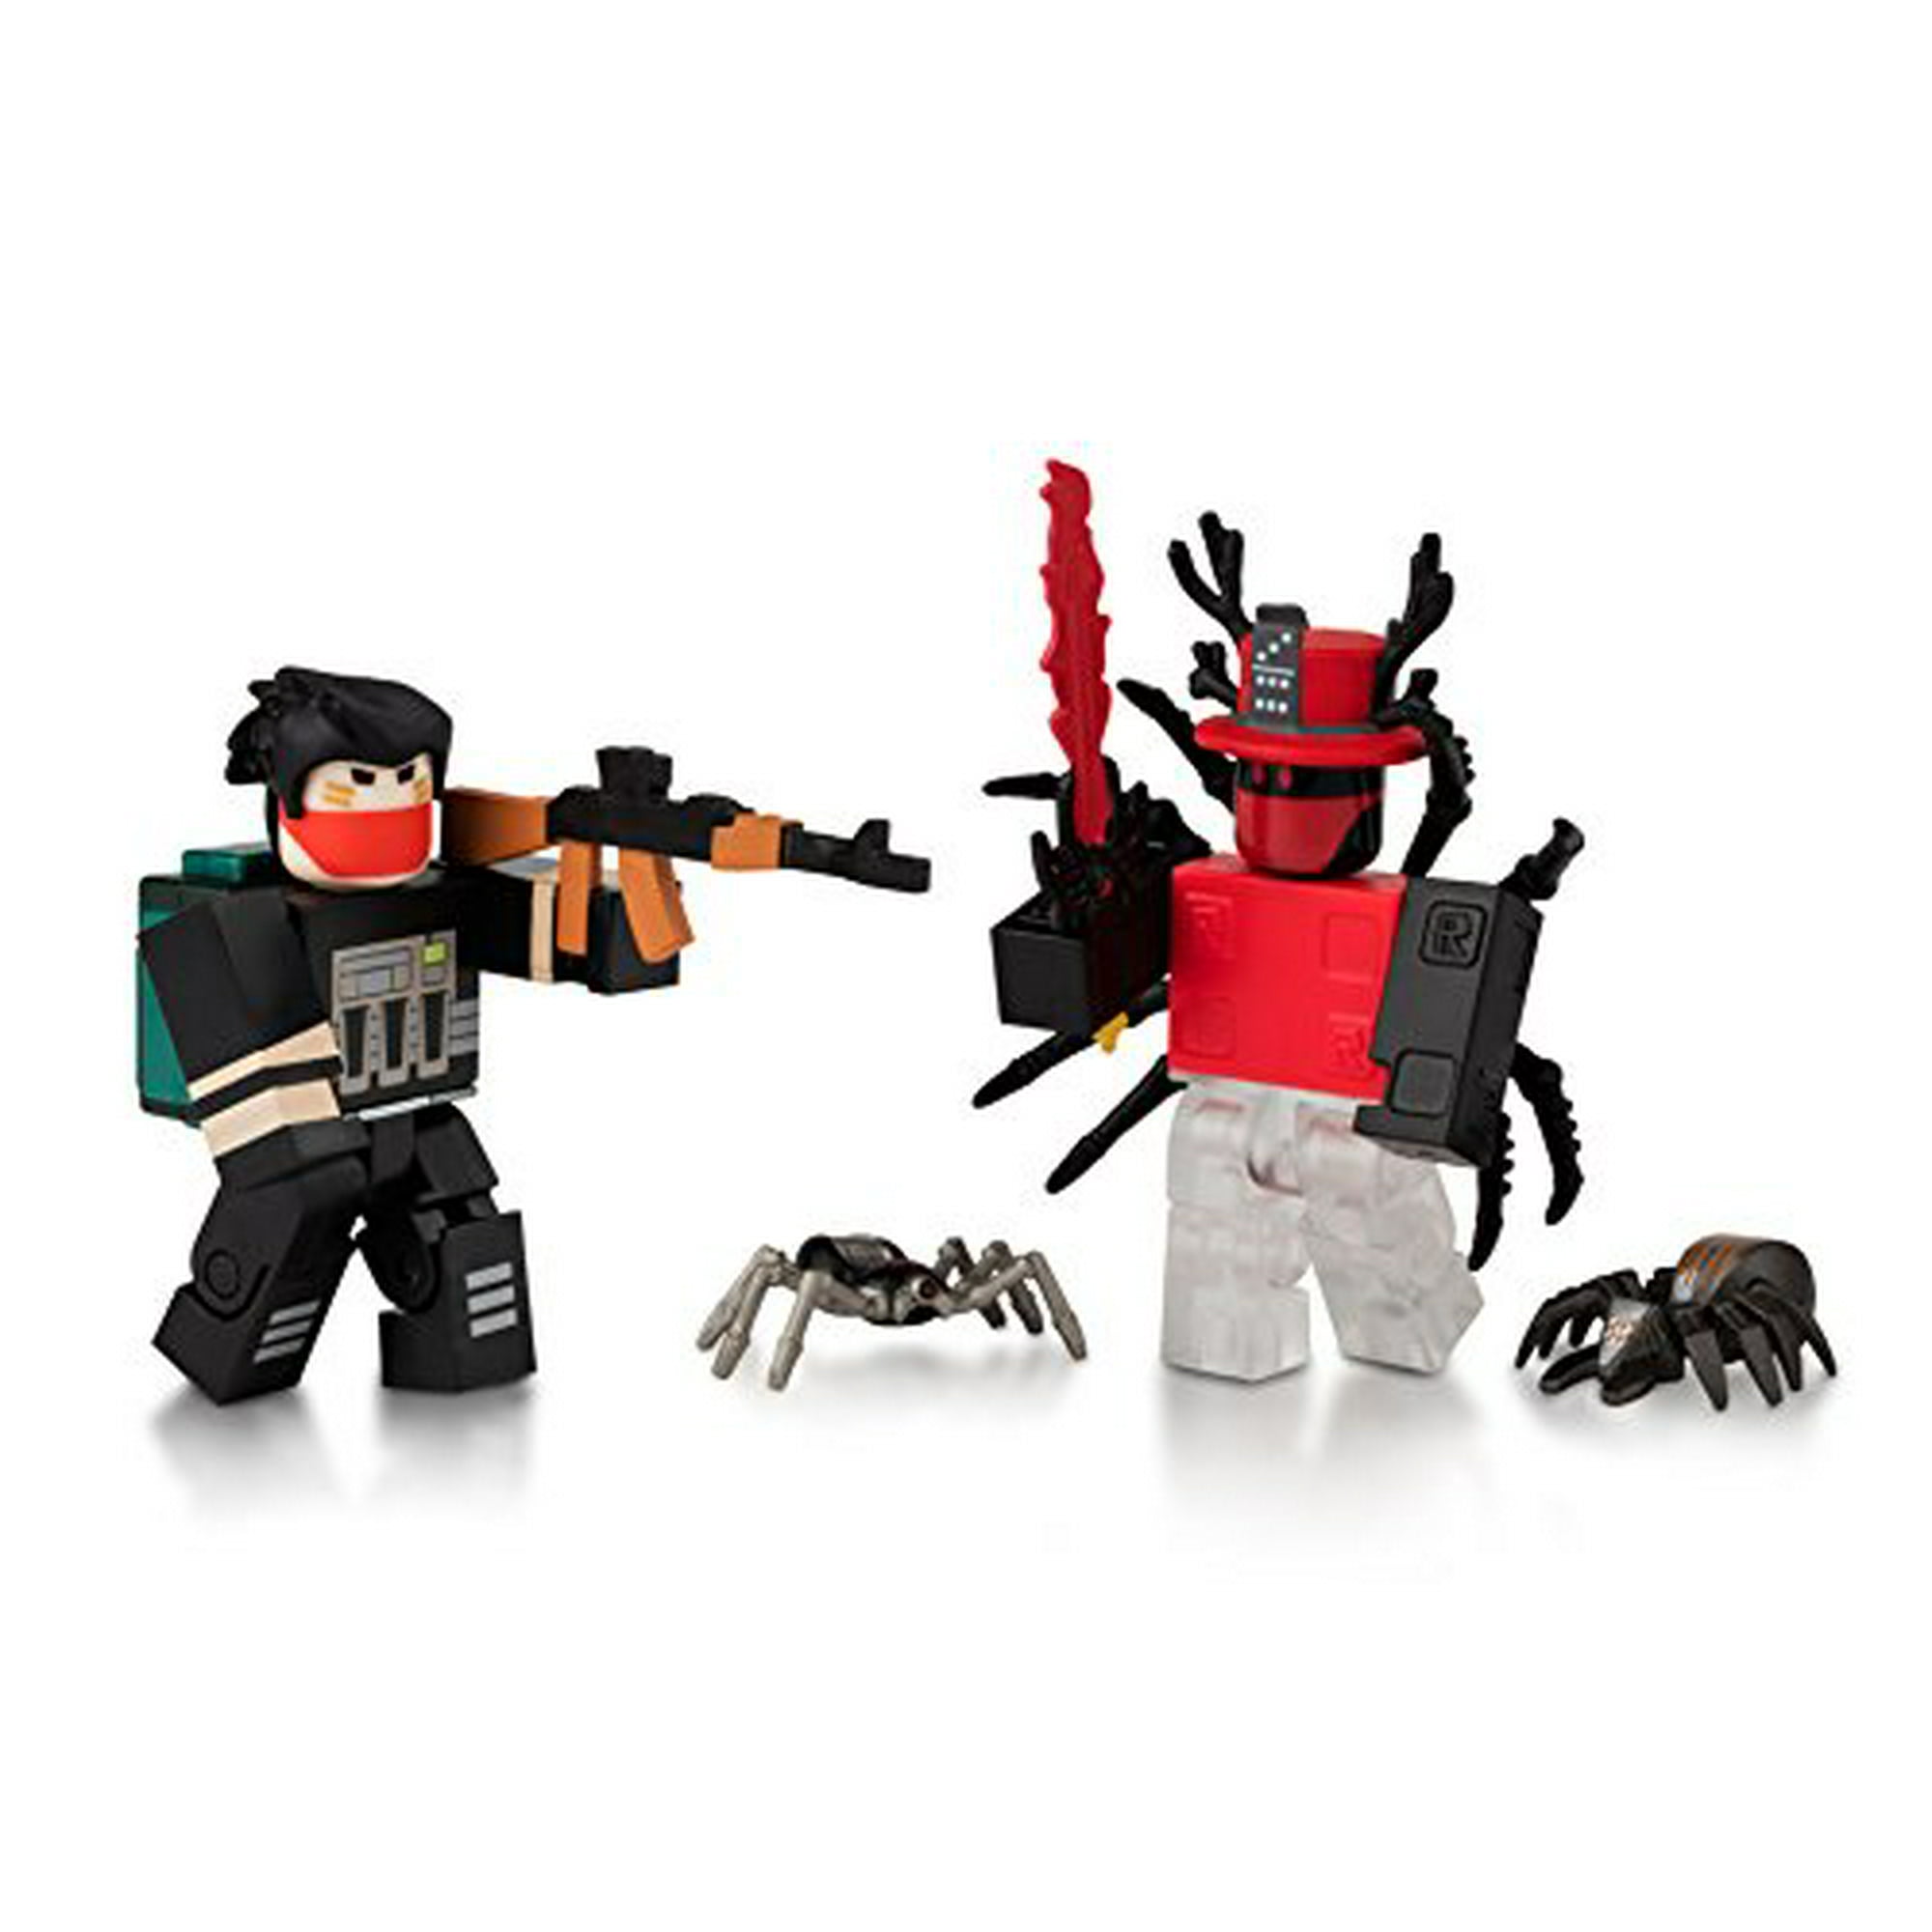 Roblox Apocalypse Rising Bandit And Homingbeacon The Whispering Dread Two Figure Pack Walmart Canada - roblox homingbeacon the whispering dread figure